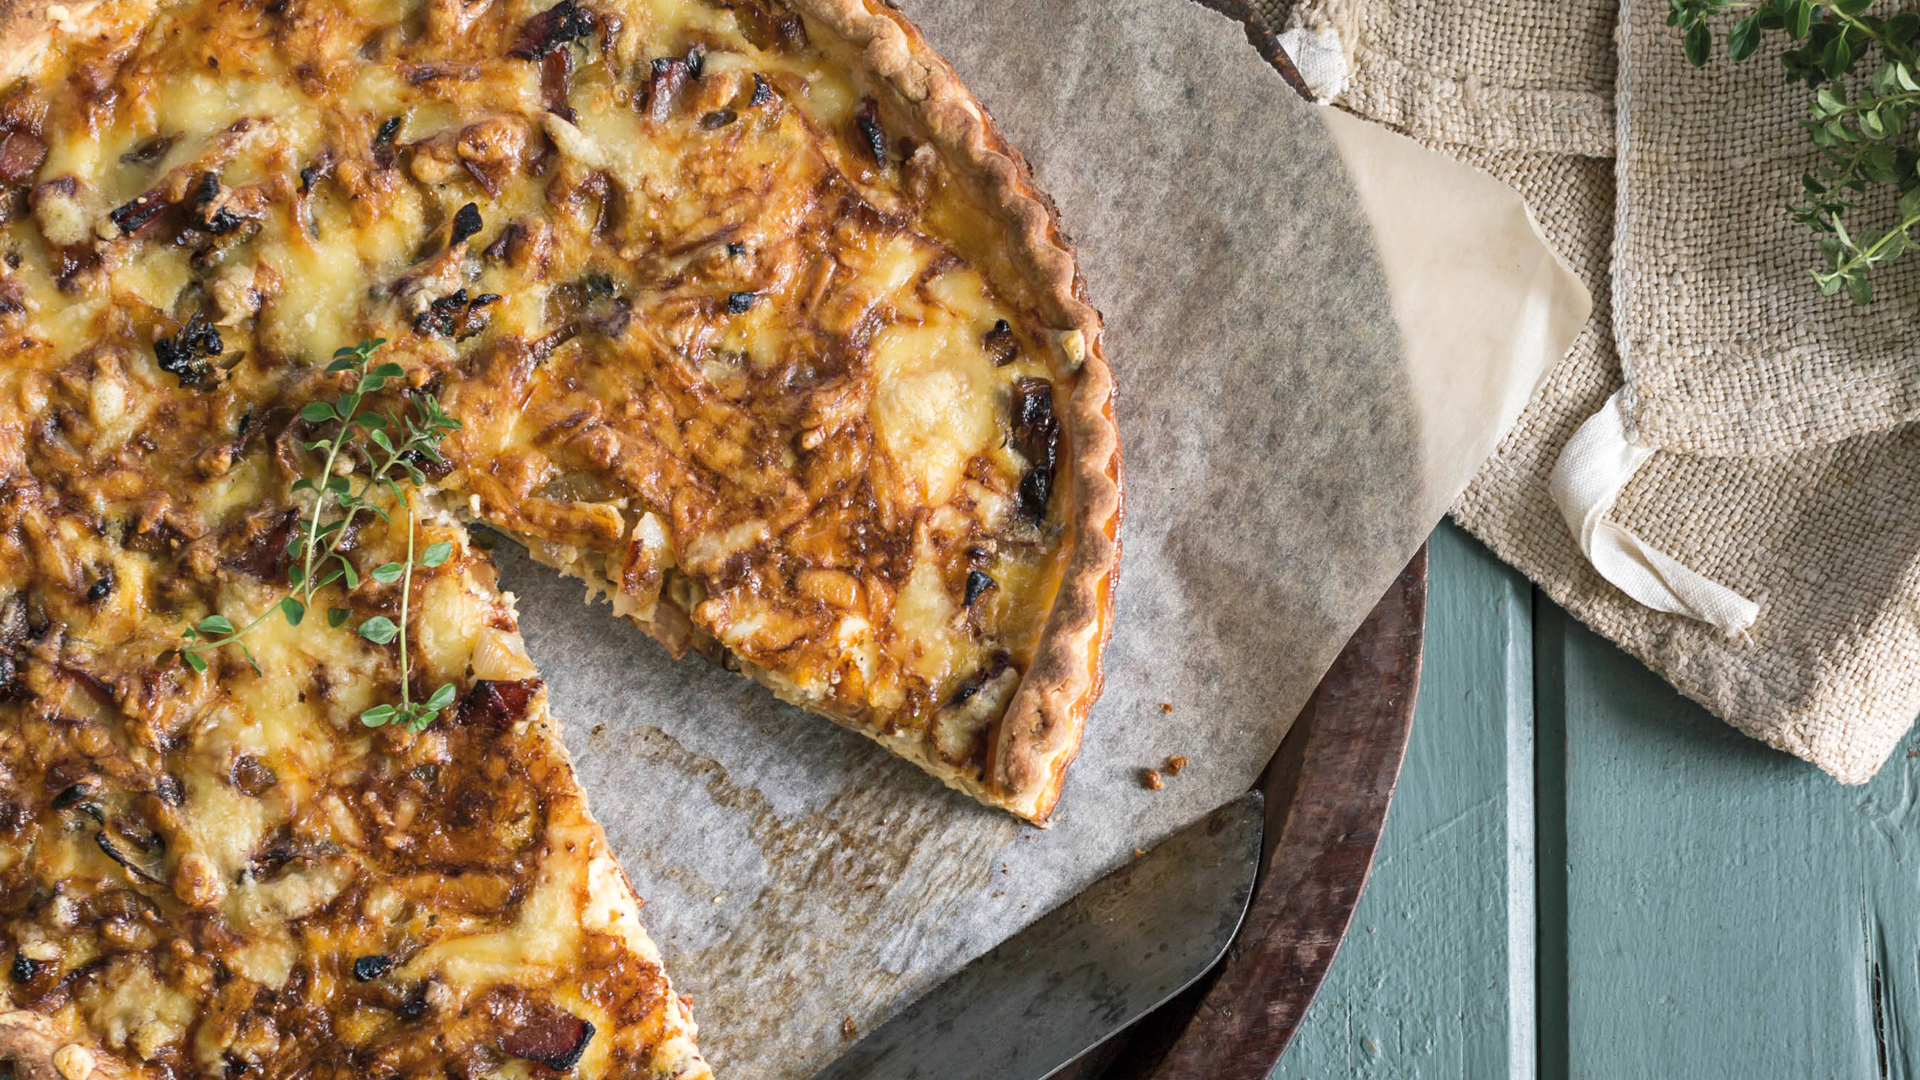 Our gluten free French onion tart recipe is filled with caramelised onions and gruyere cheese